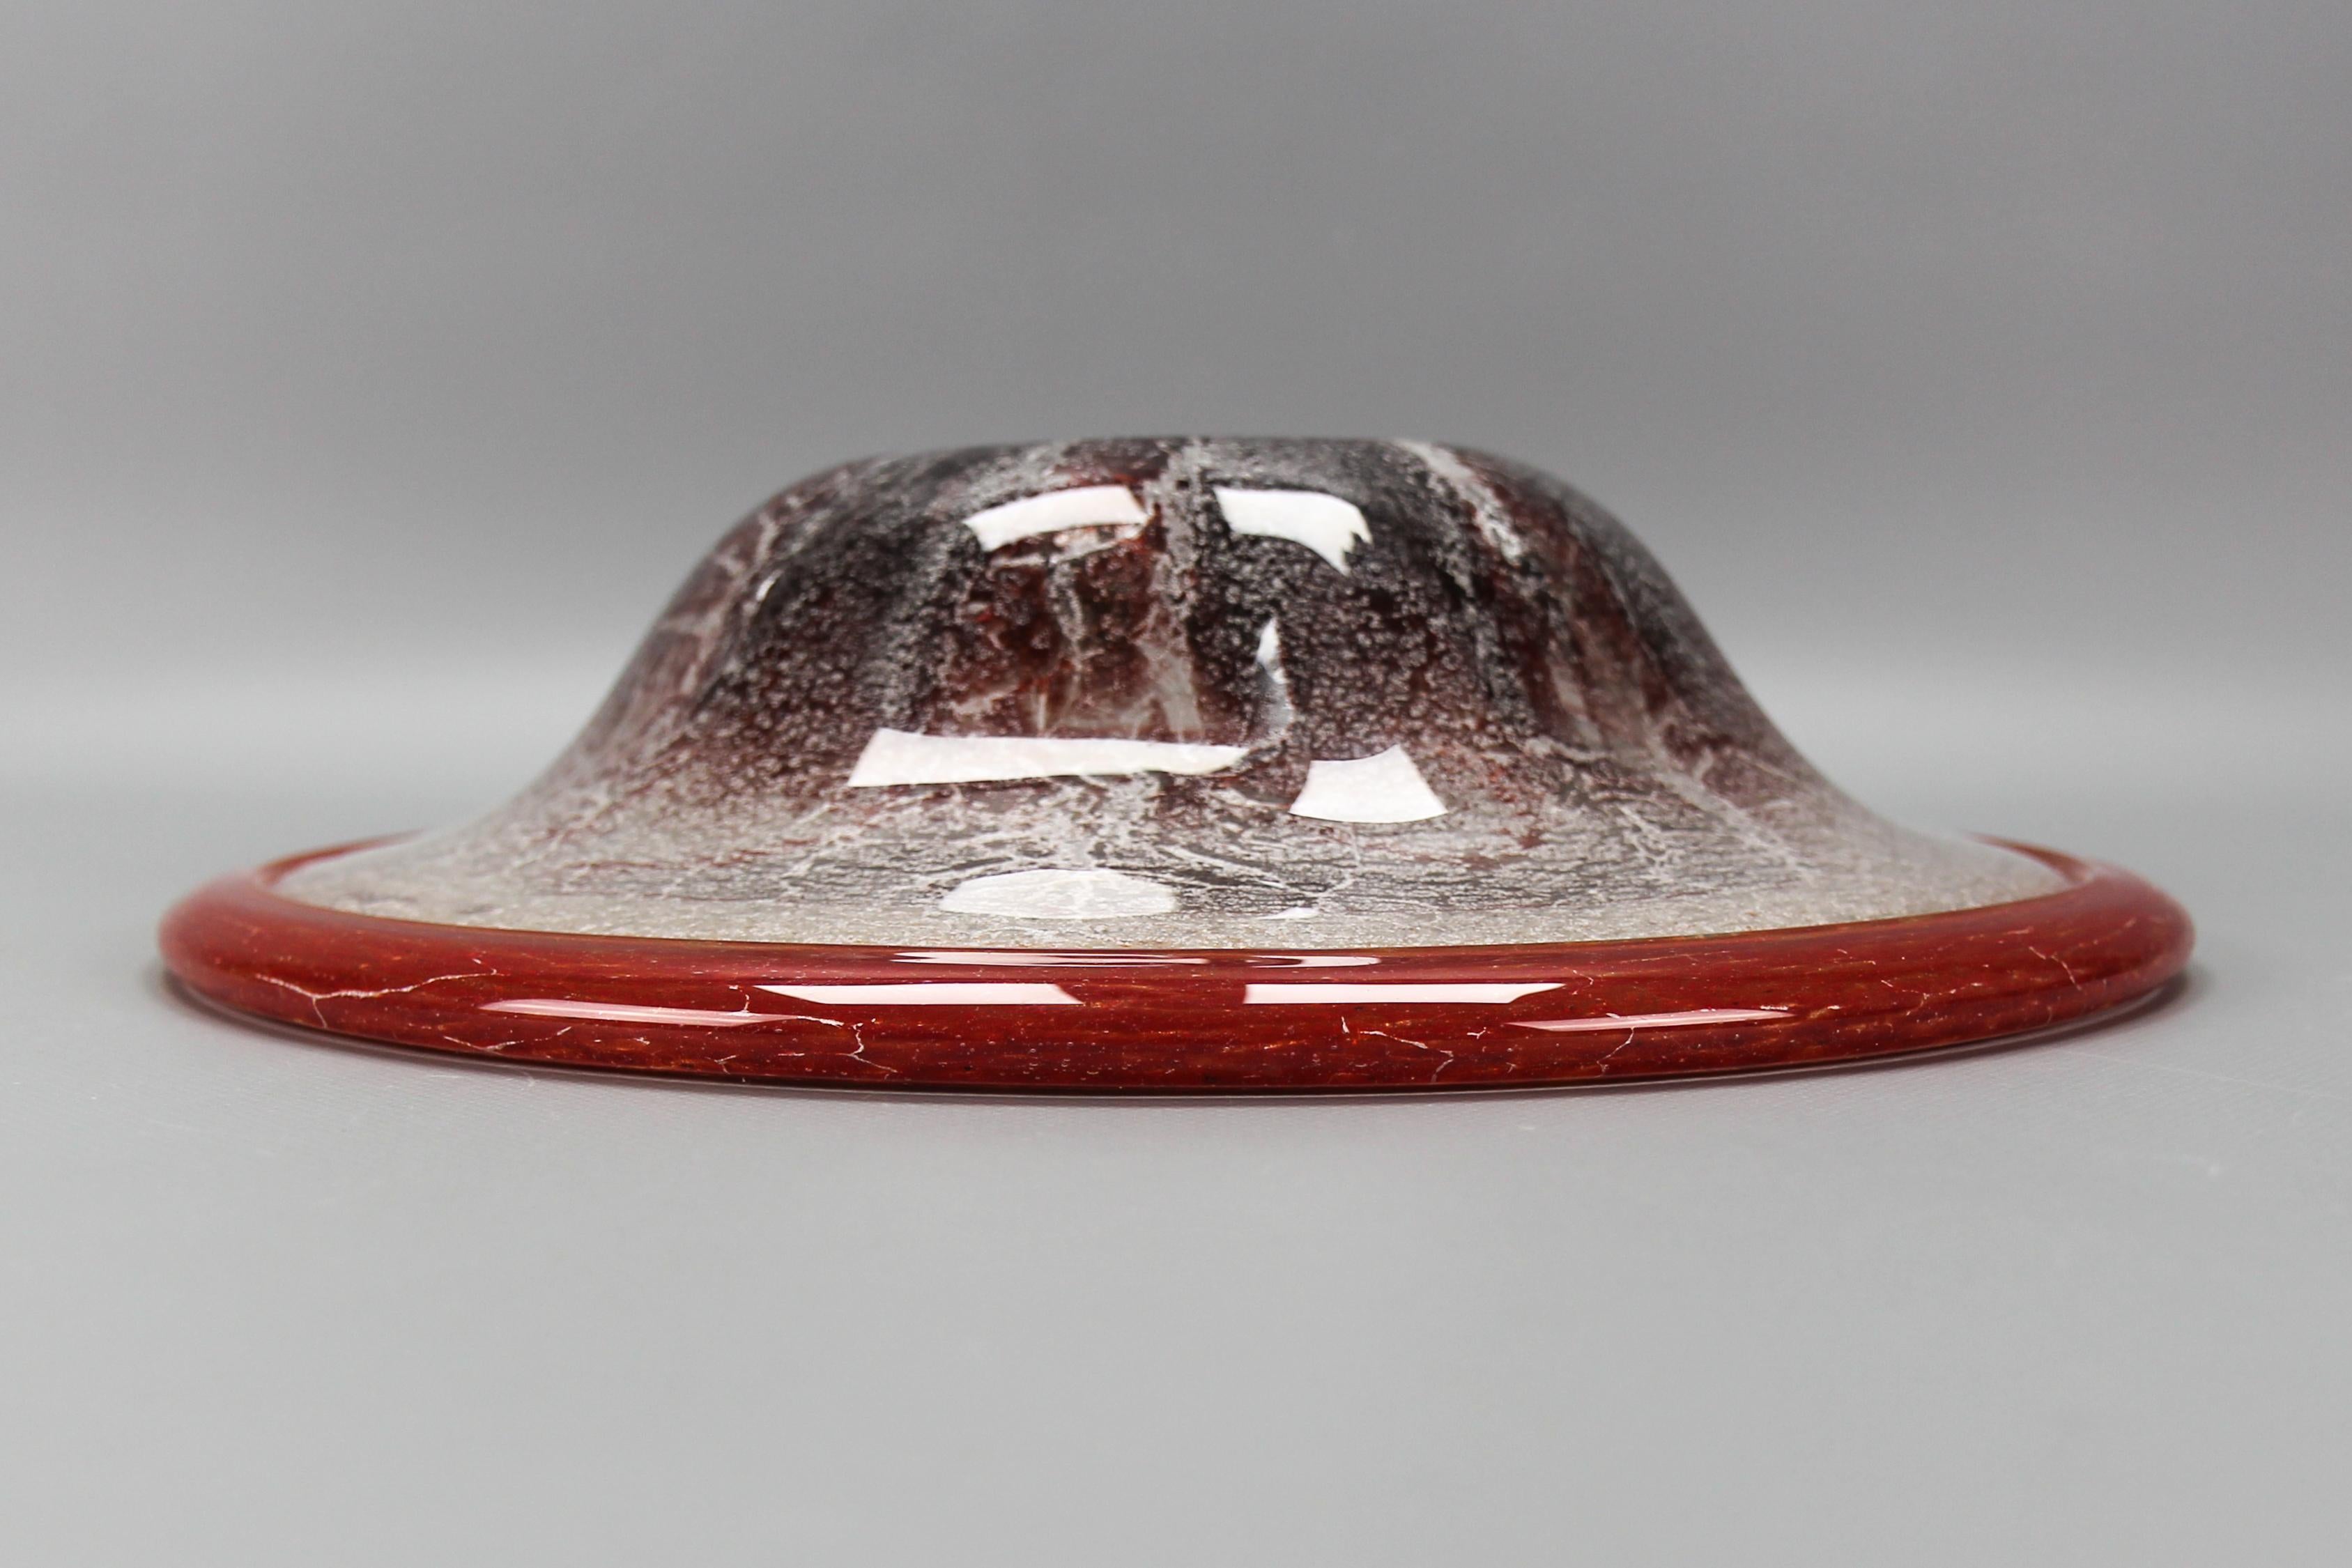 German Ikora Art Glass Bowl in Red, White and Burgundy by WMF, ca. 1930s For Sale 4